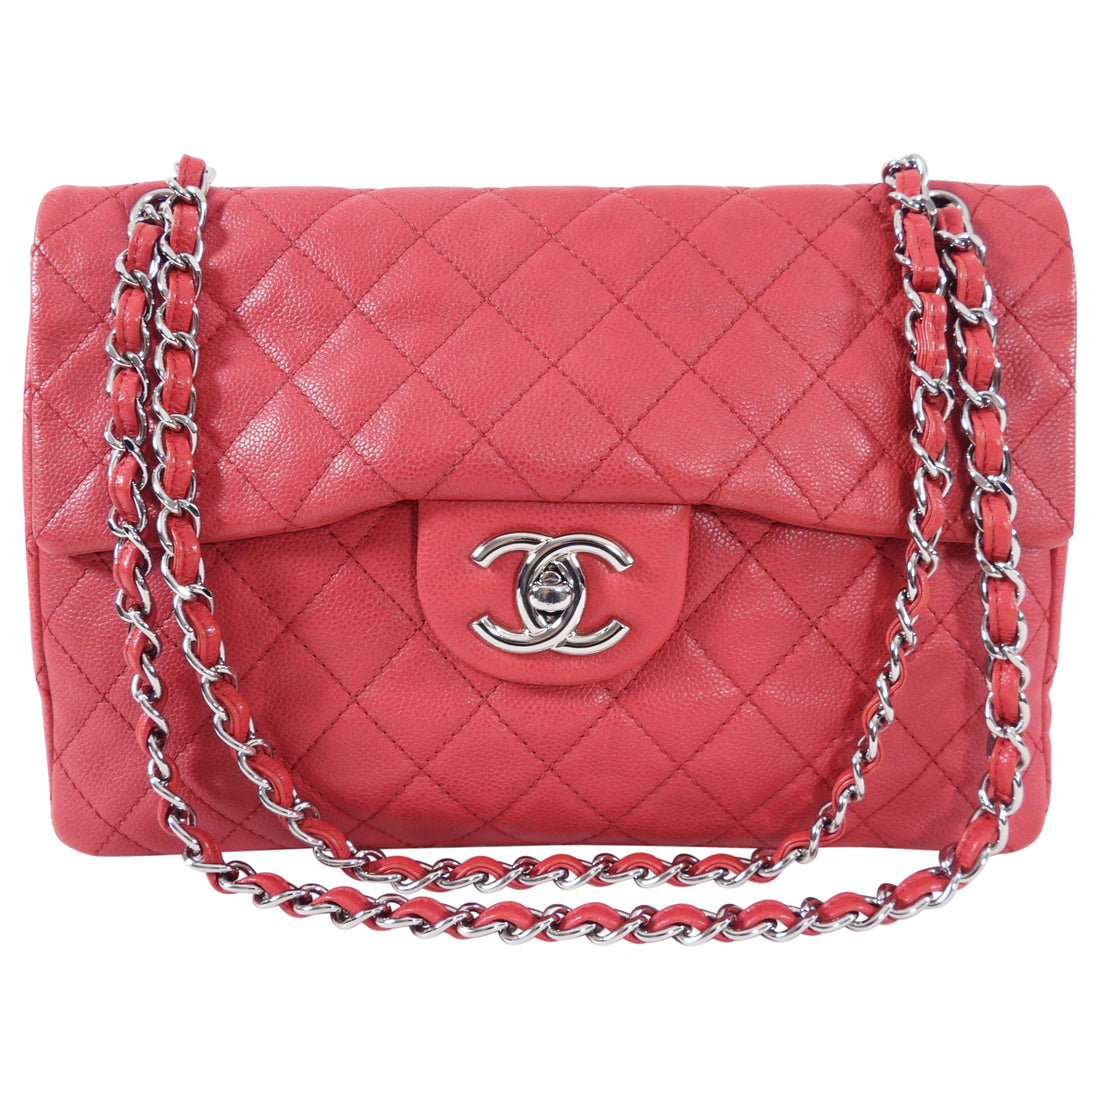 Chanel Hot Pink Quilted Maxi Single Flap Bag